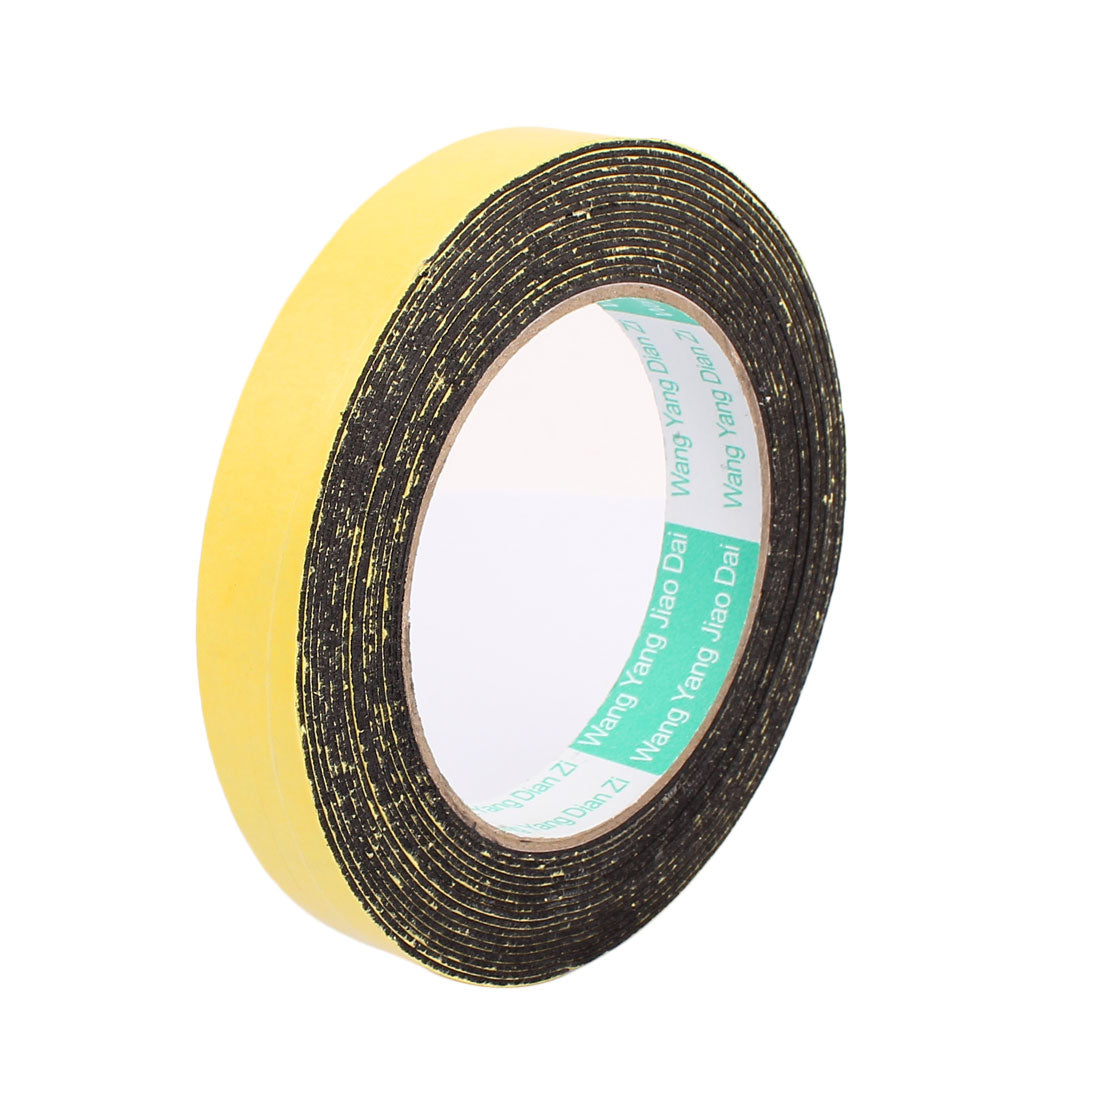 uxcell Uxcell 2Pcs 18mm x 1mm Single Sided Self Adhesive Shockproof Sponge Foam Tape 5M Length